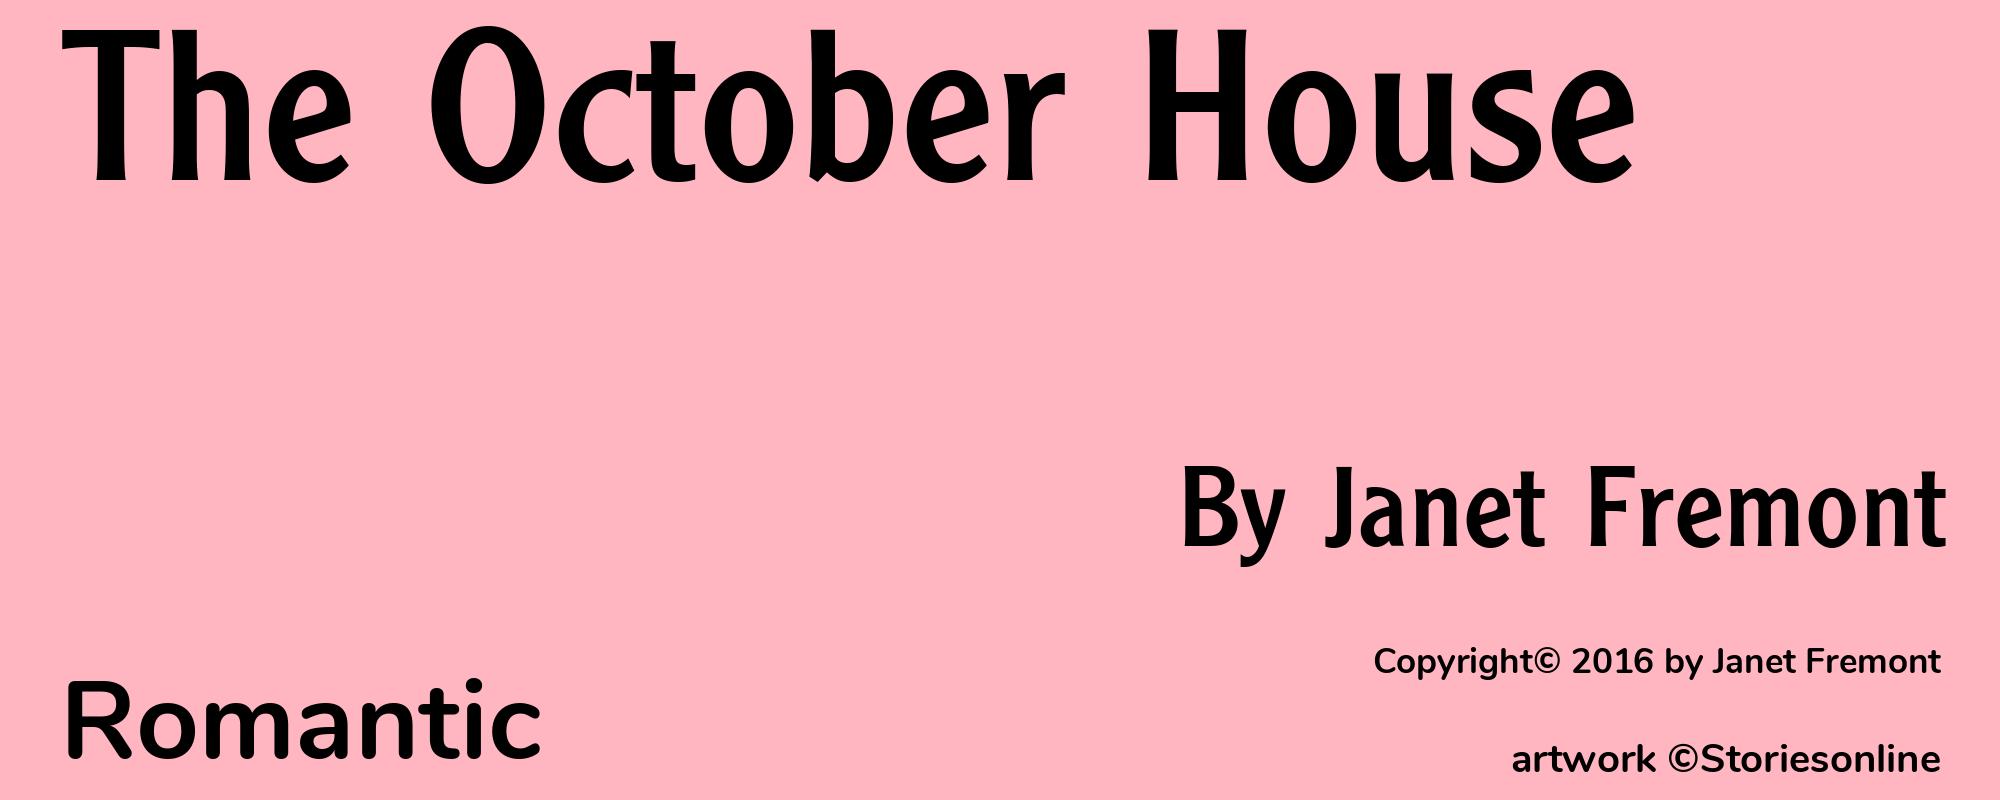 The October House - Cover